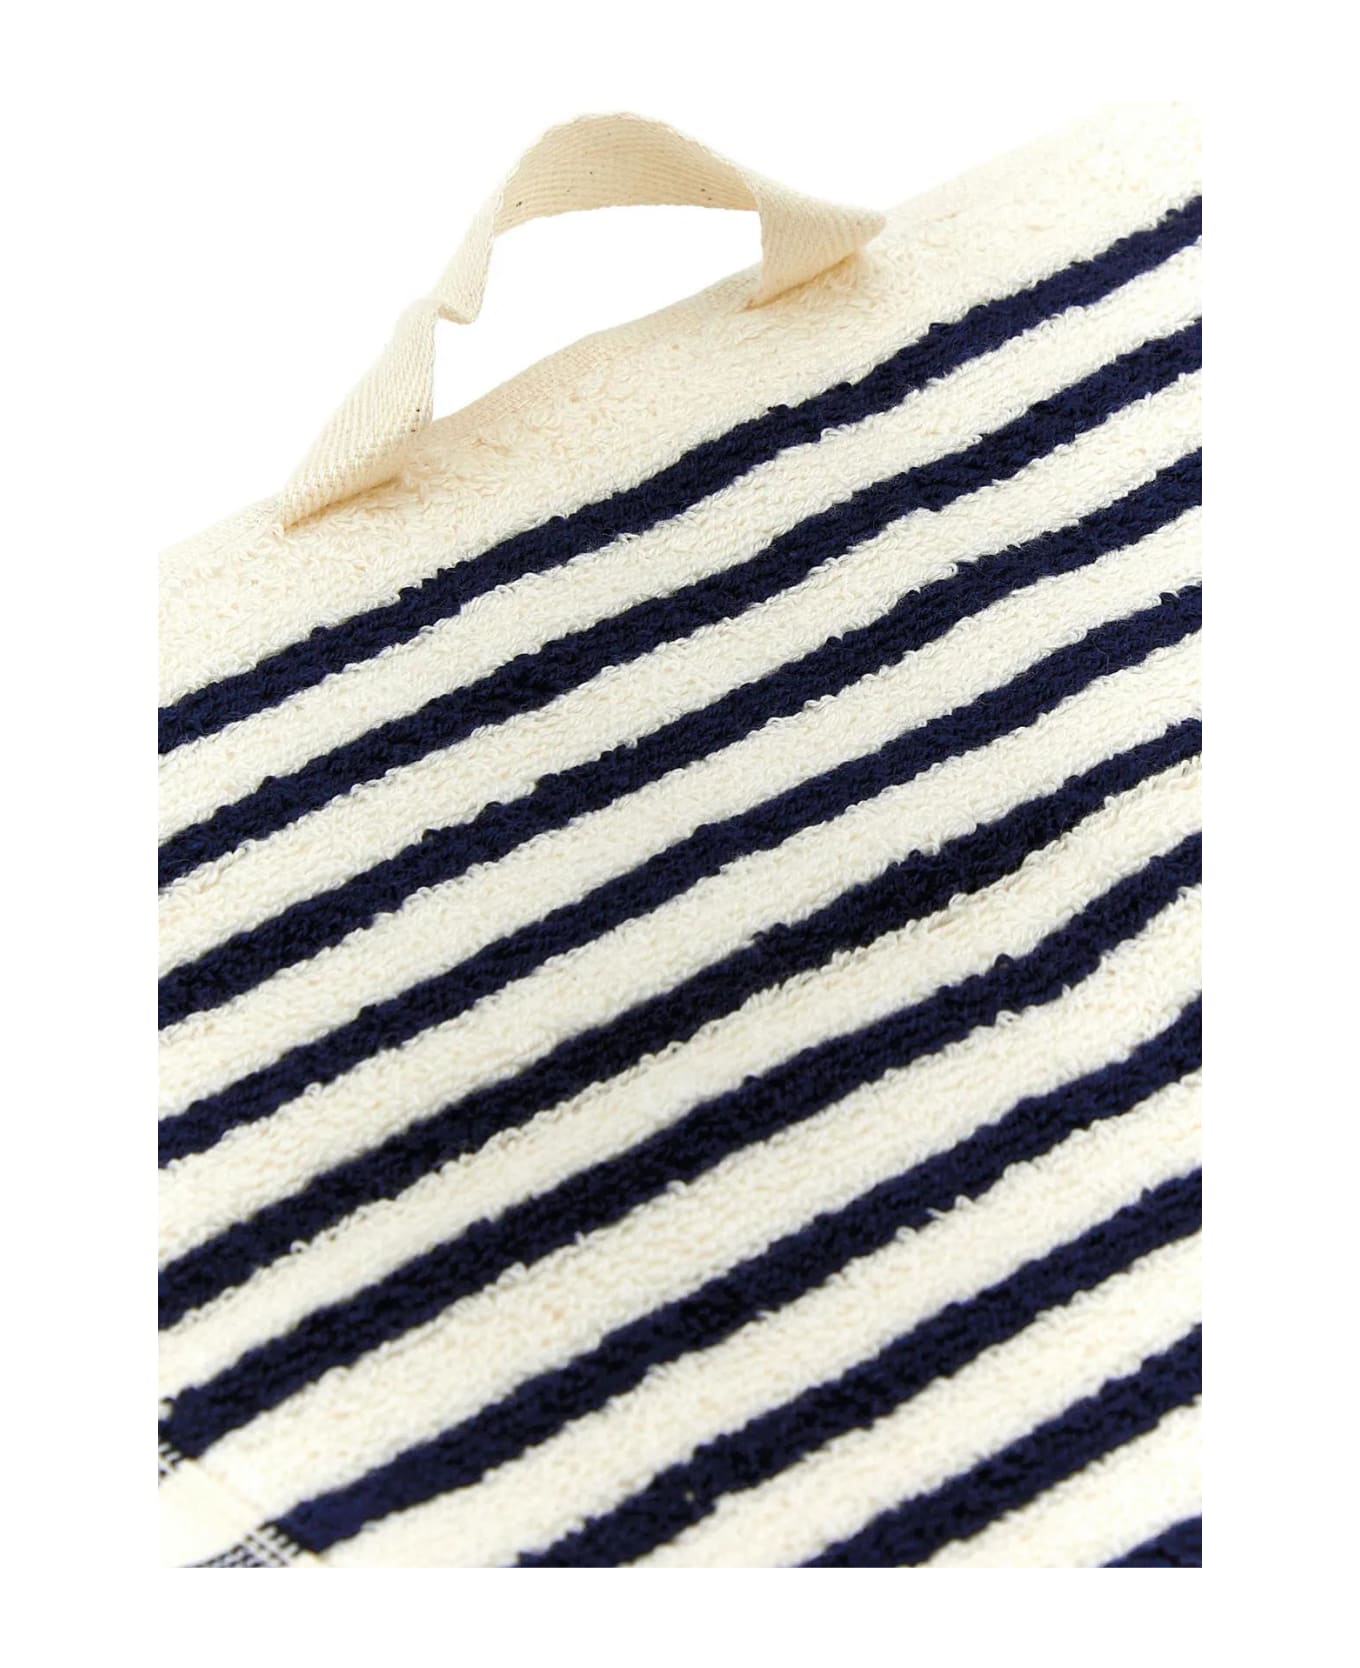 Tekla Embroidered Terry Towel - NAVY